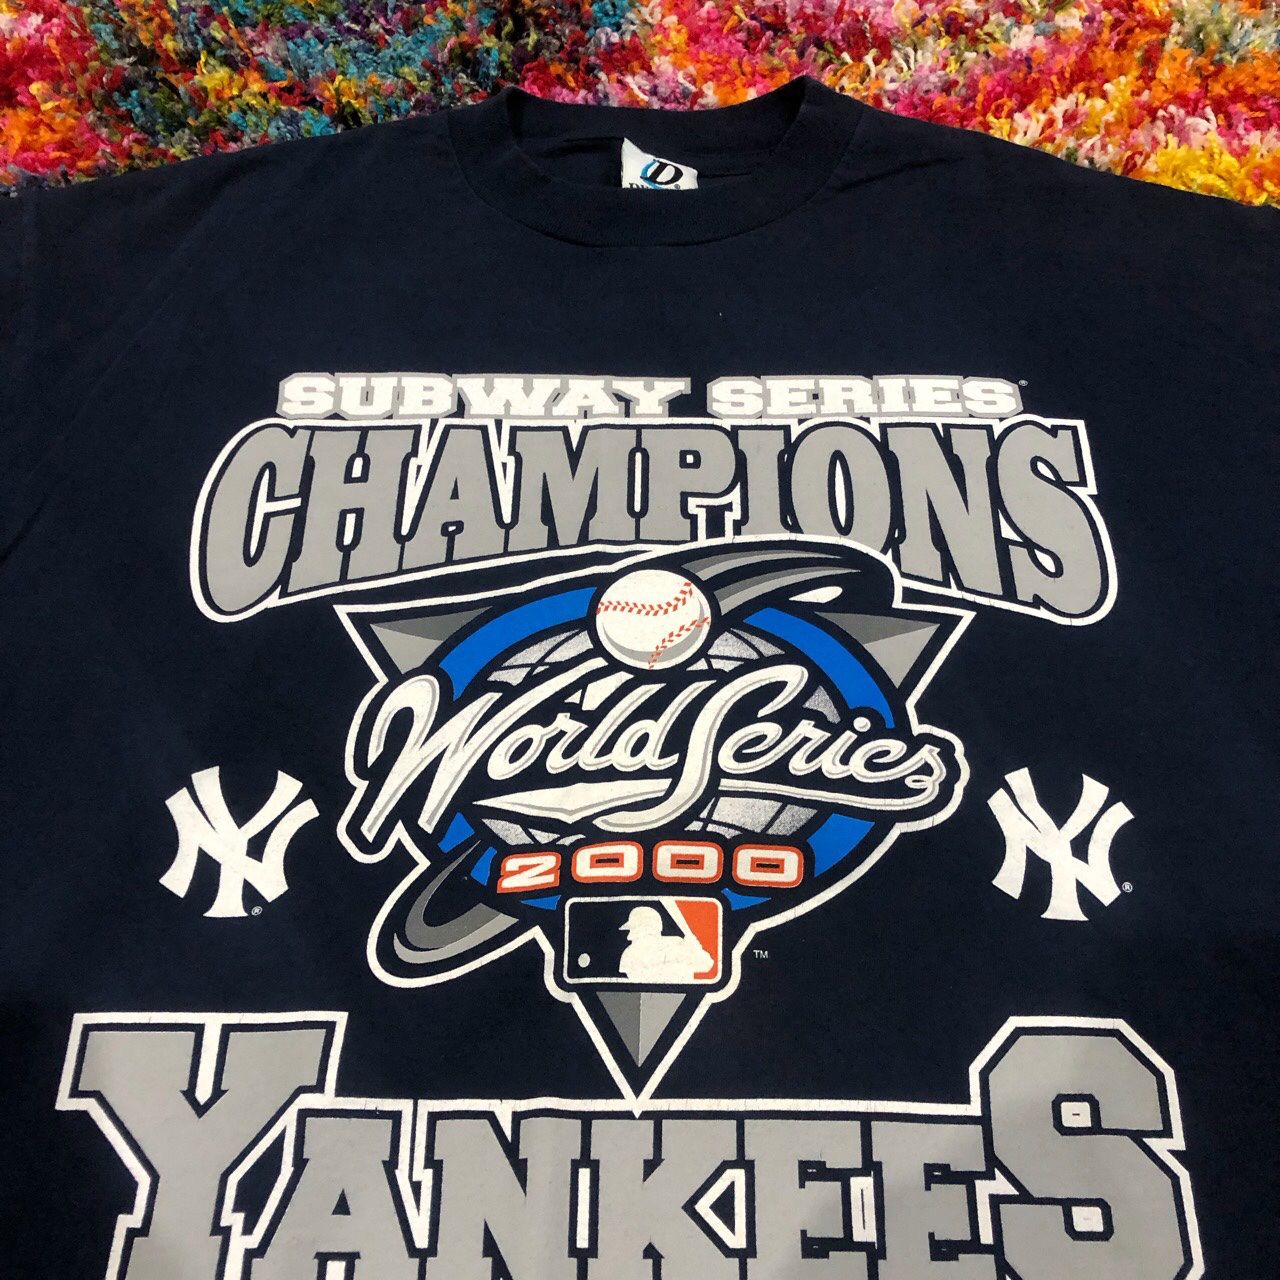 World Series Yankees Vintage T Shirt for Sale in Calabasas, CA